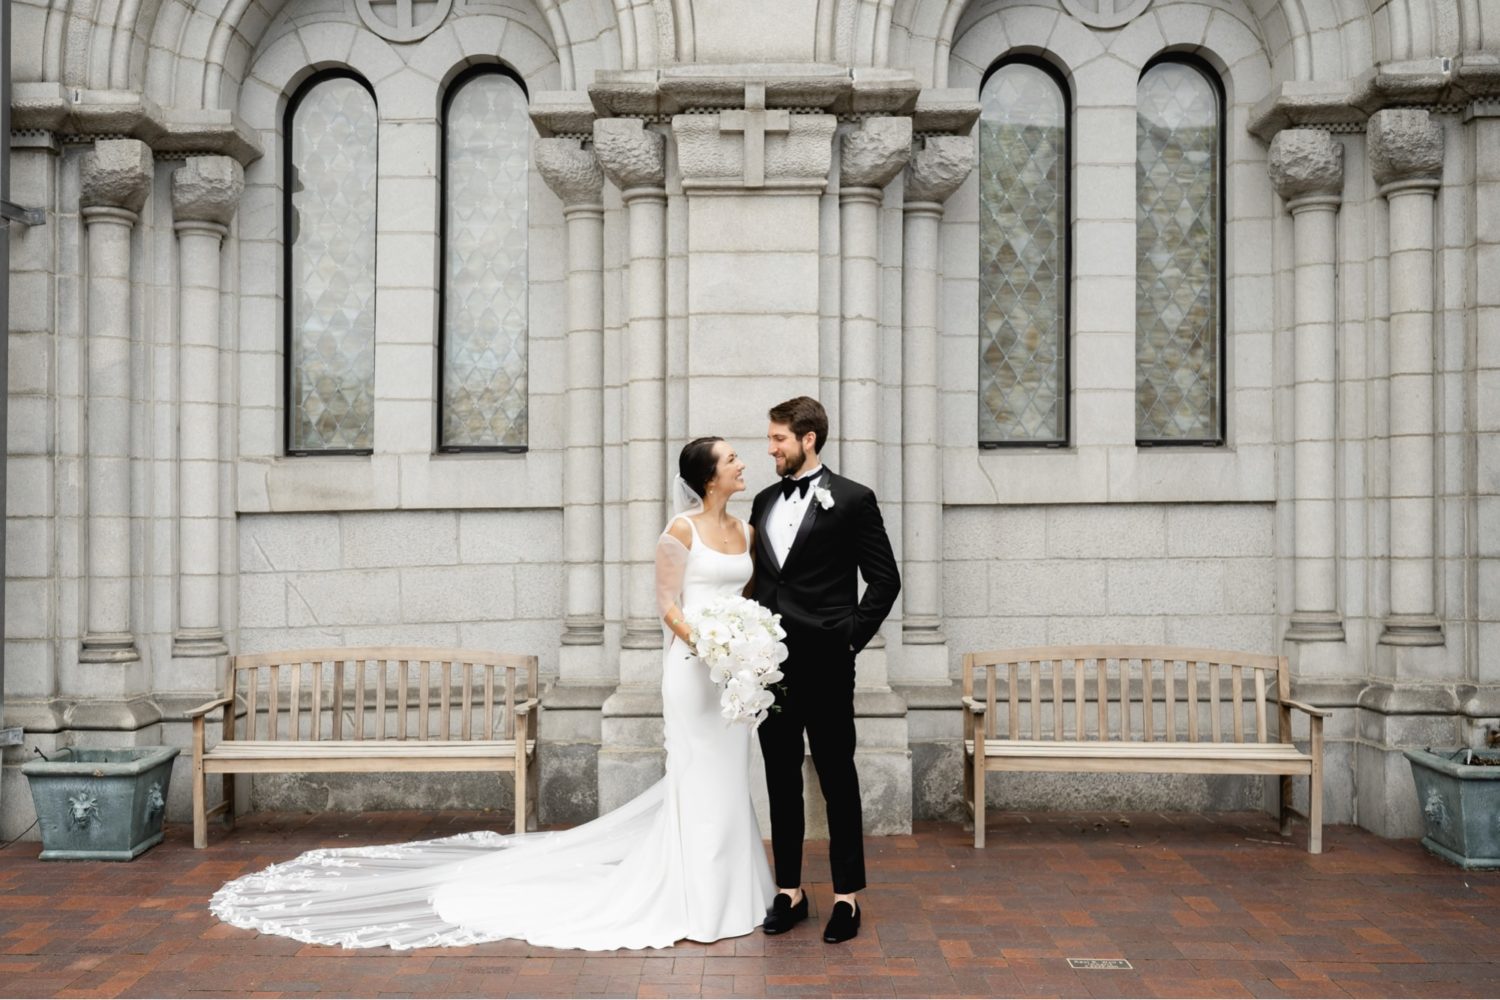 Bride and groom smiling at each other in the courtyard of the Cathedral Basilica of St. Louis